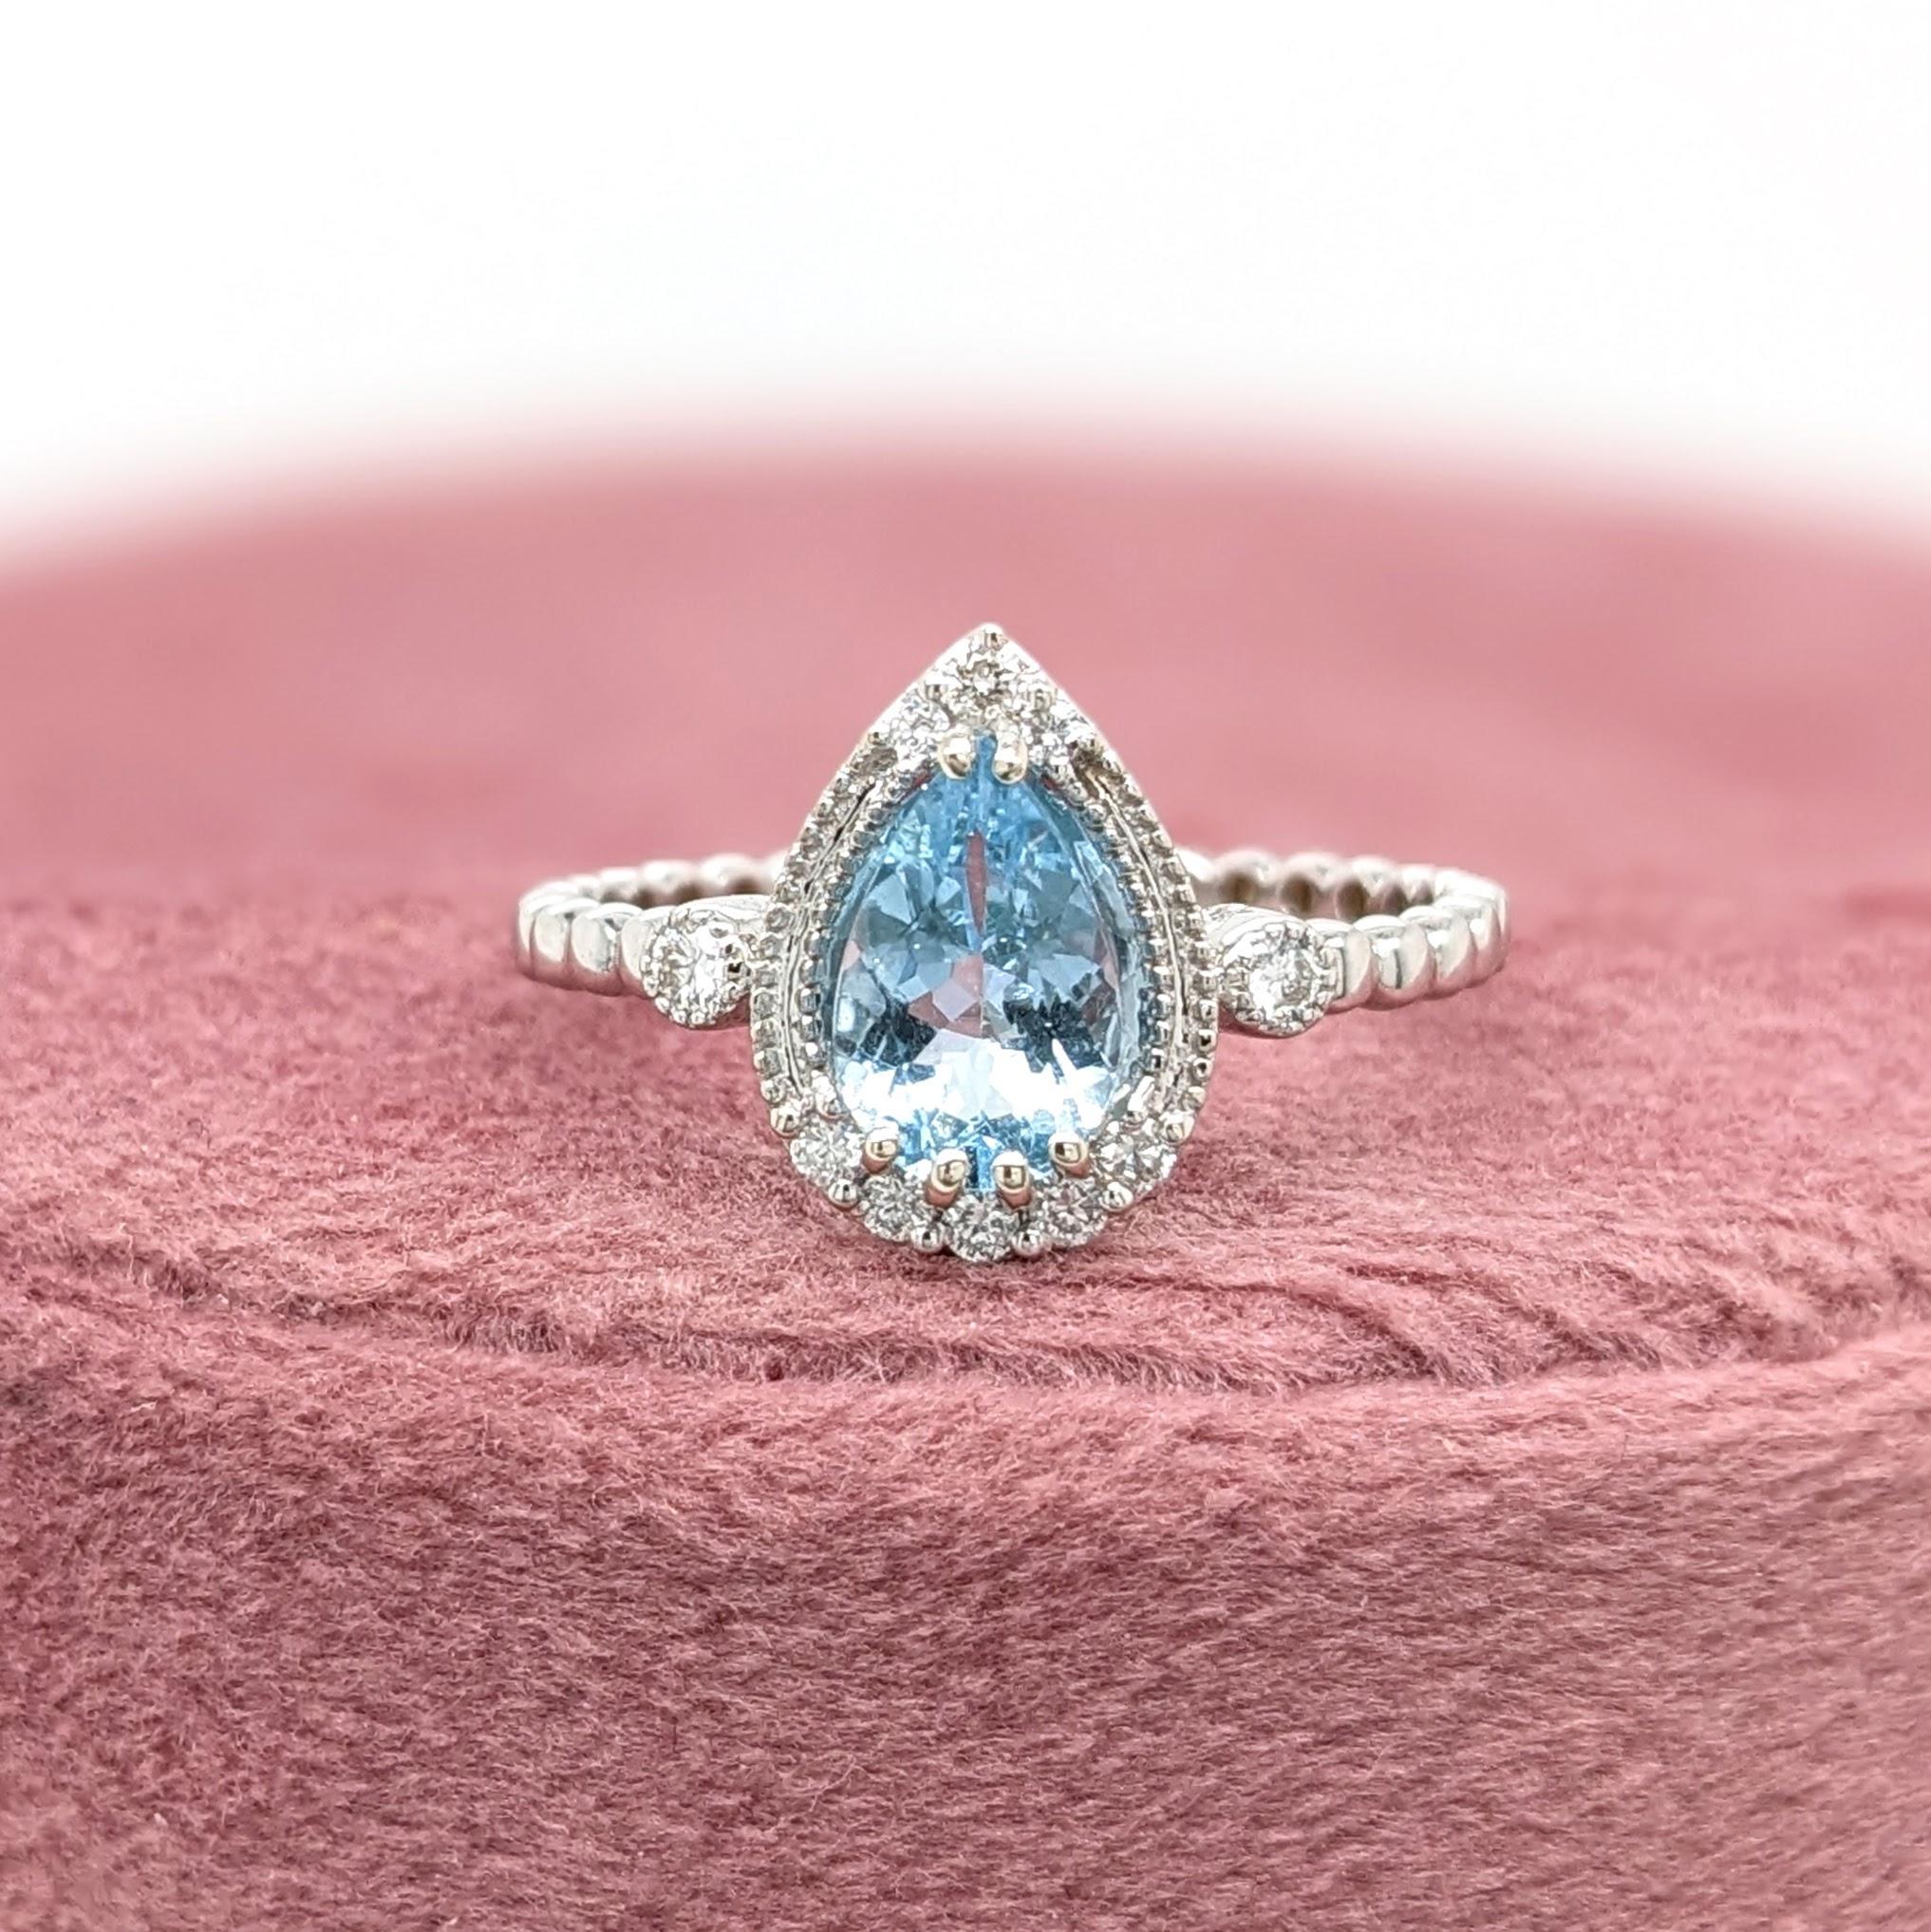 This beautiful ring features a pear cut sparkling Aquamarine in 14k White Gold with a natural diamonds halo. A ring design perfect for an eye catching engagement or anniversary. This ring also makes a beautiful march birthstone ring for your loved